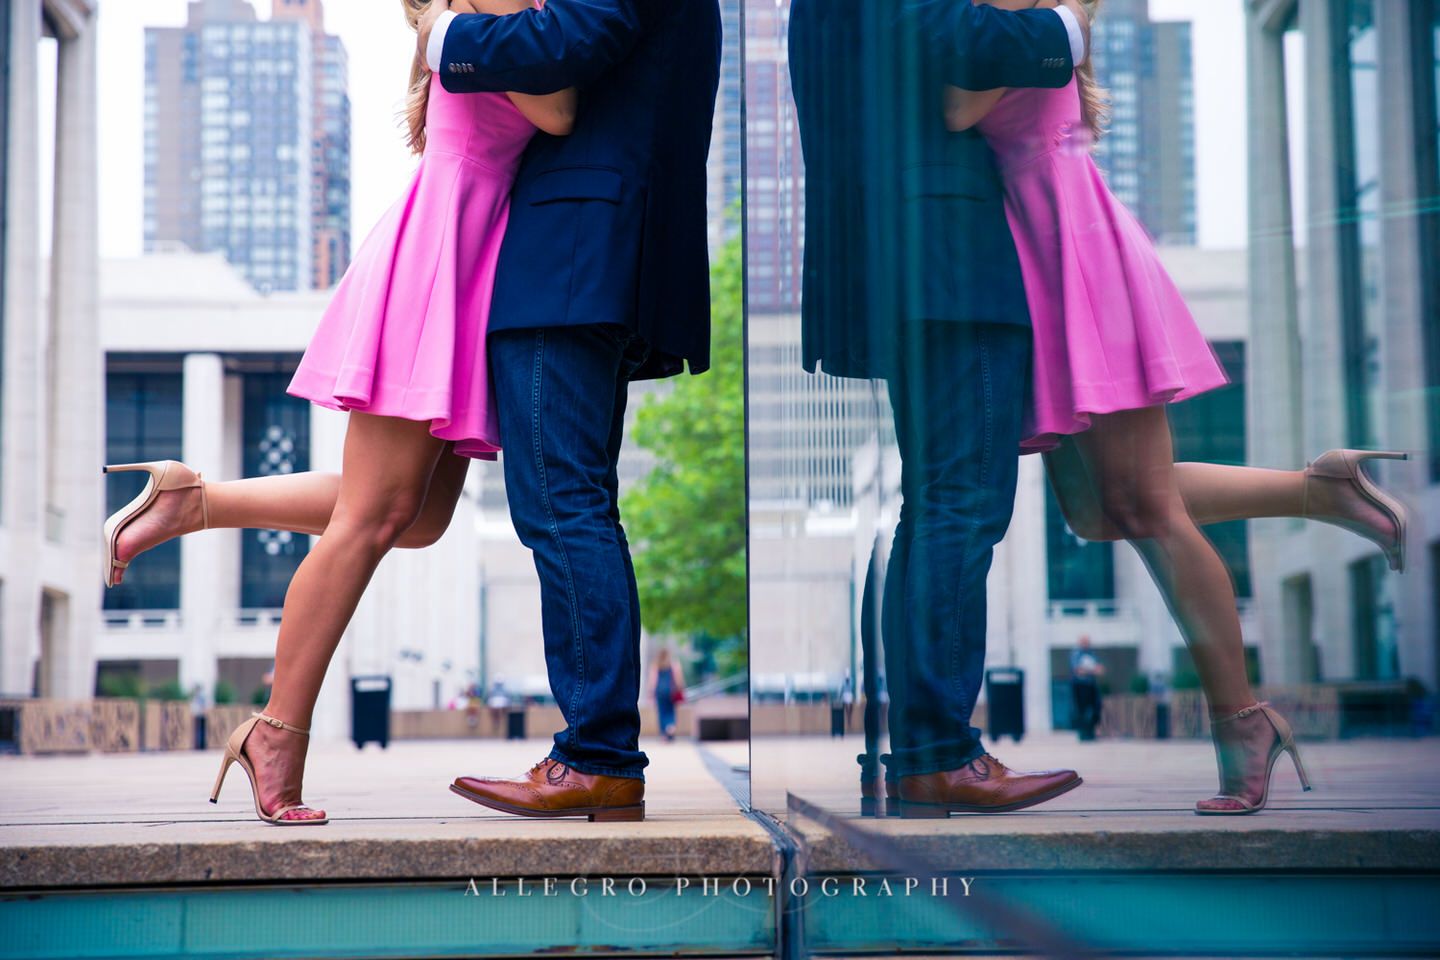 lincoln center manhattan e-session photo by Allegro Photography